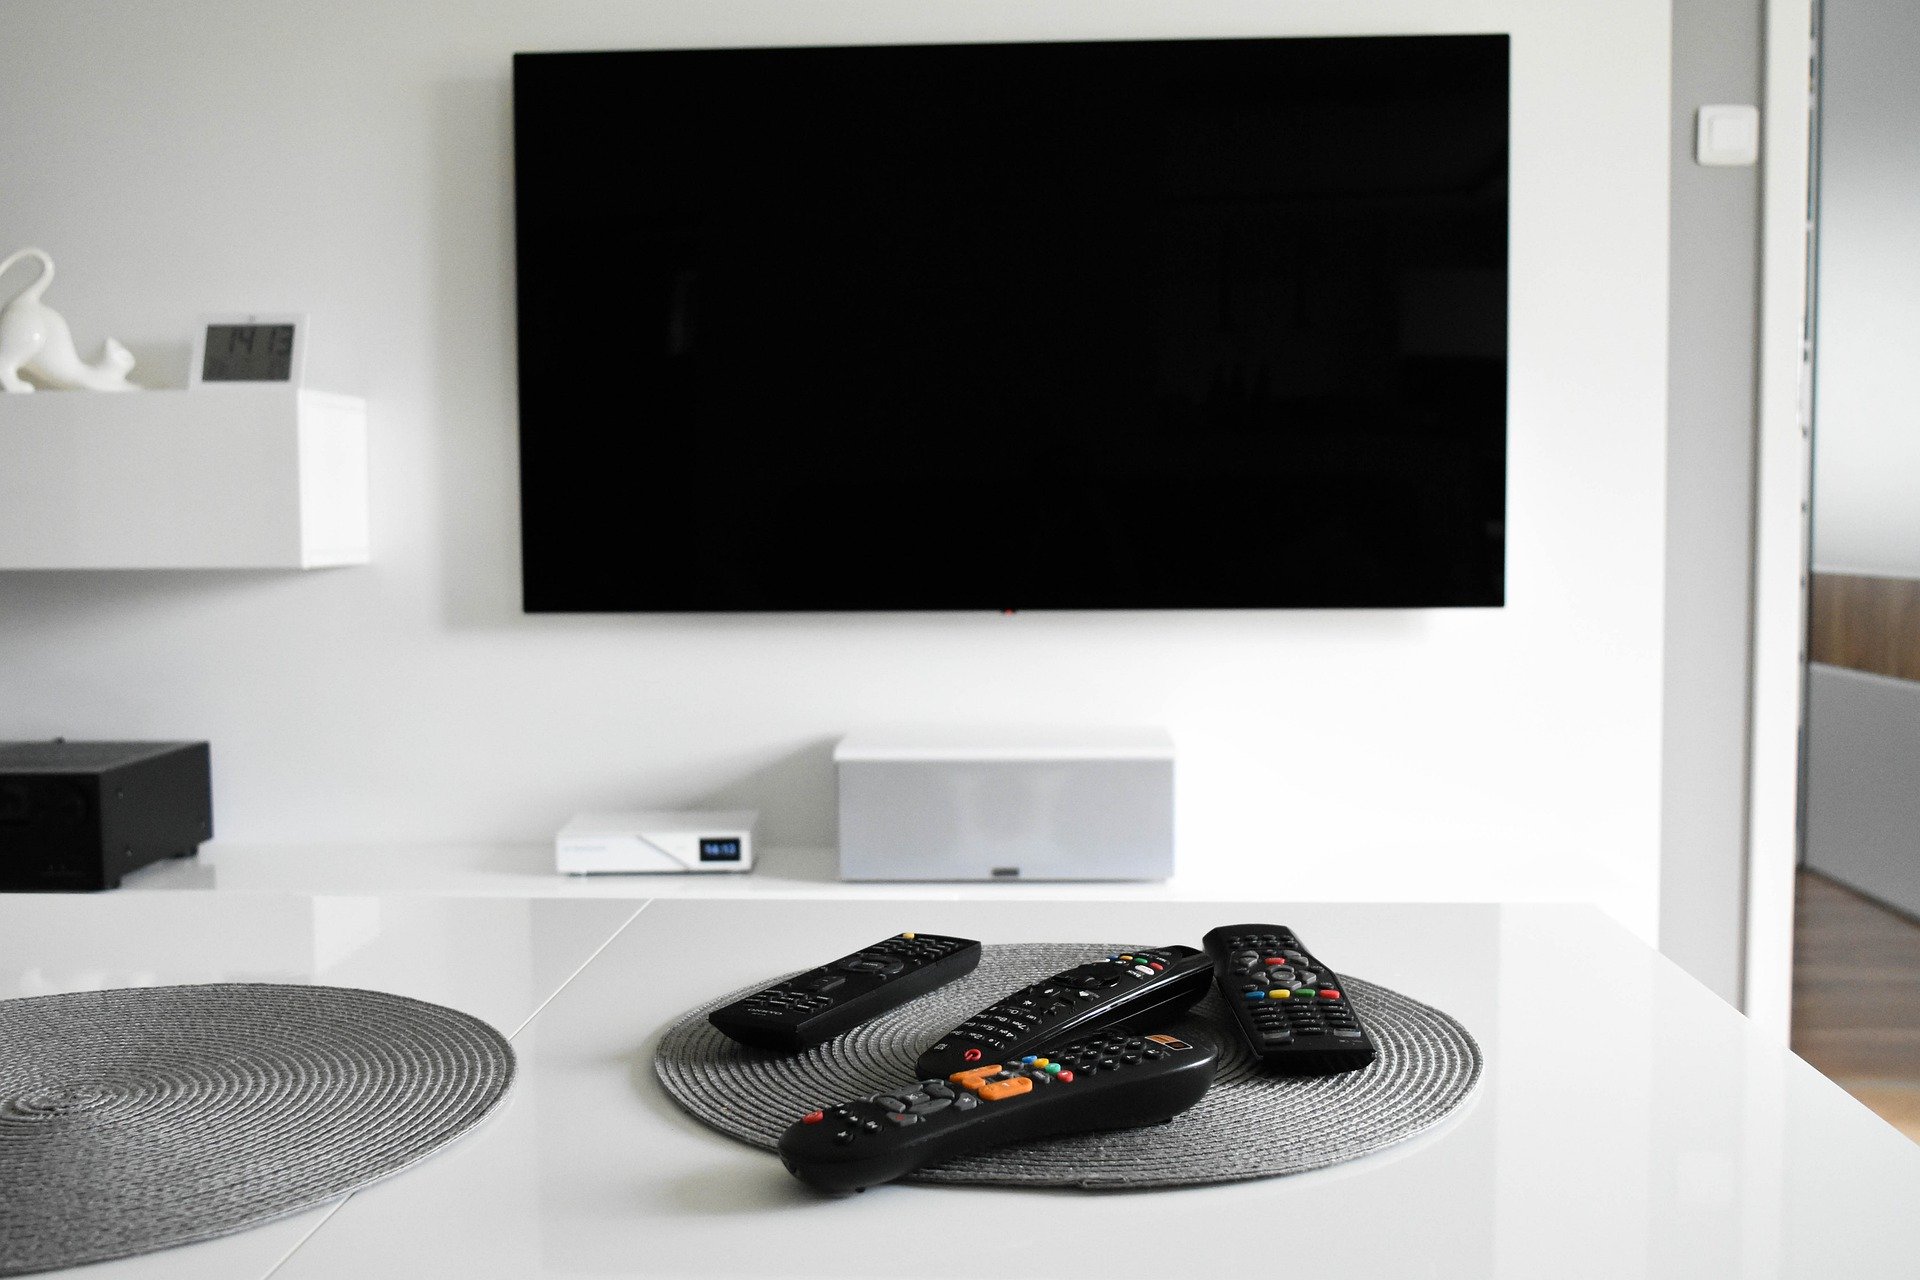 Home media room TV with remote controls on a table